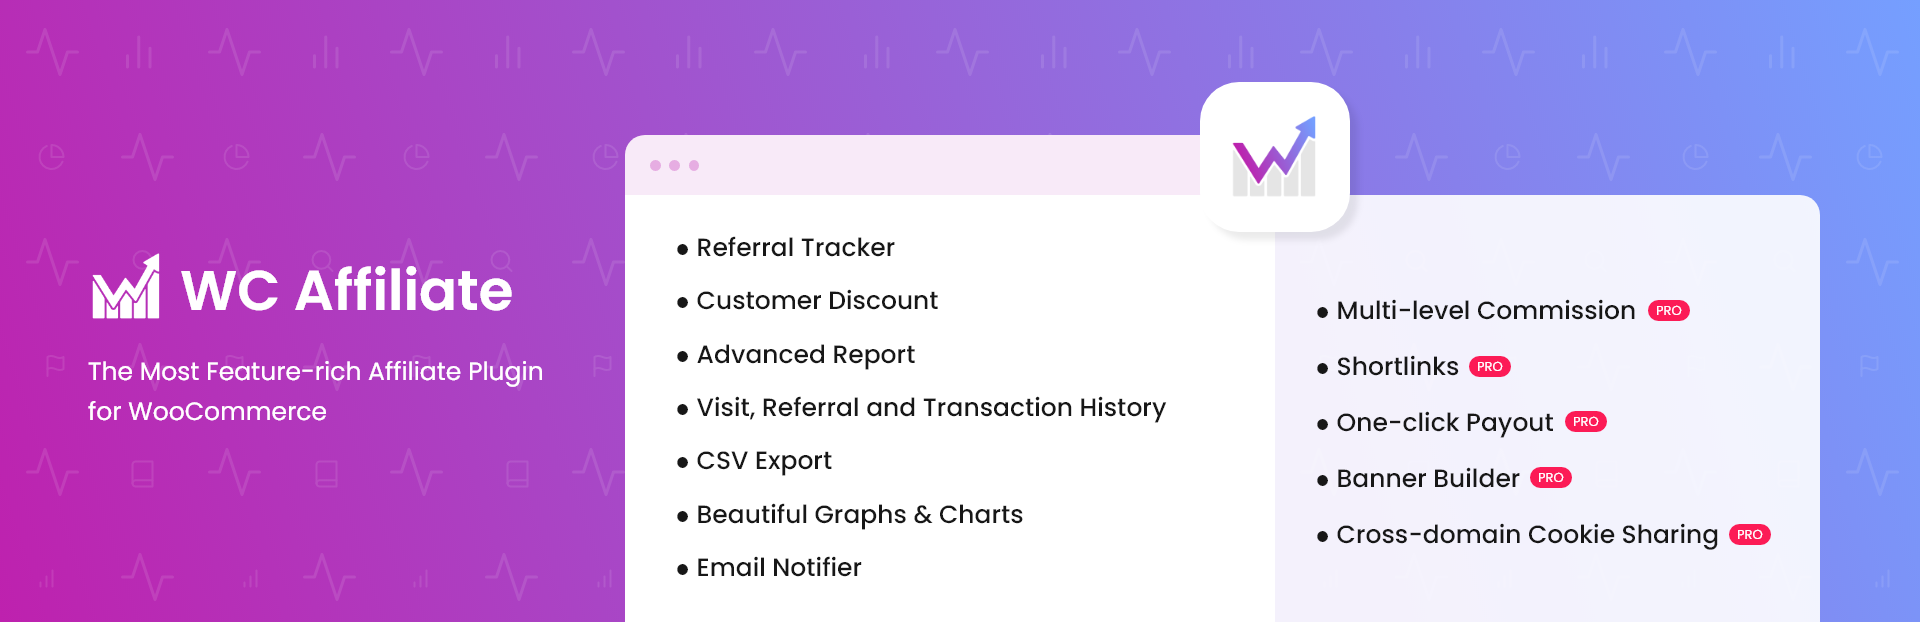 WC Affiliate – A Full-fledged Affiliate Manager for WooCommerce